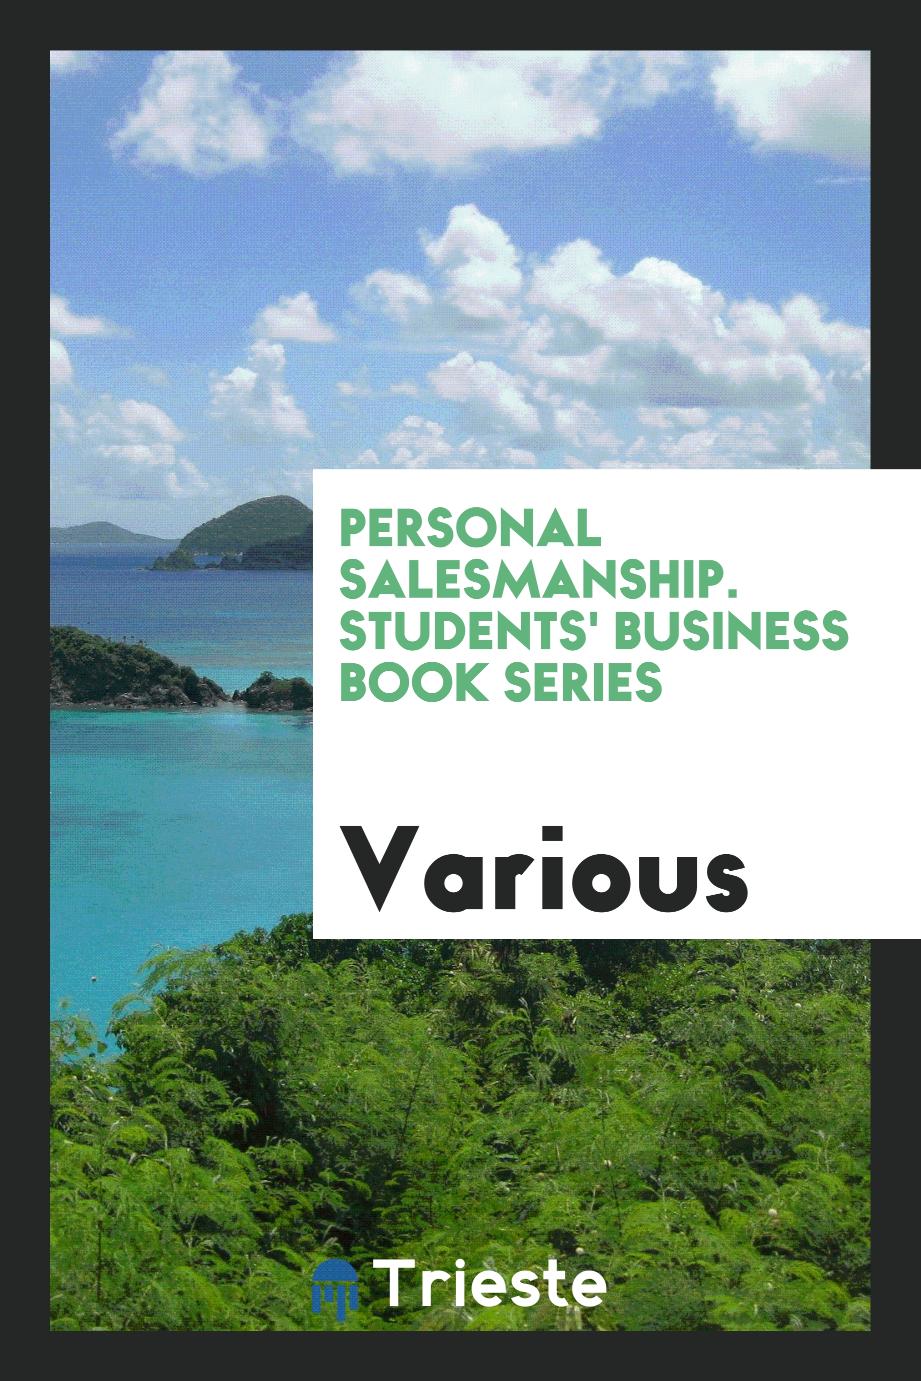 Personal Salesmanship. Students' Business Book Series